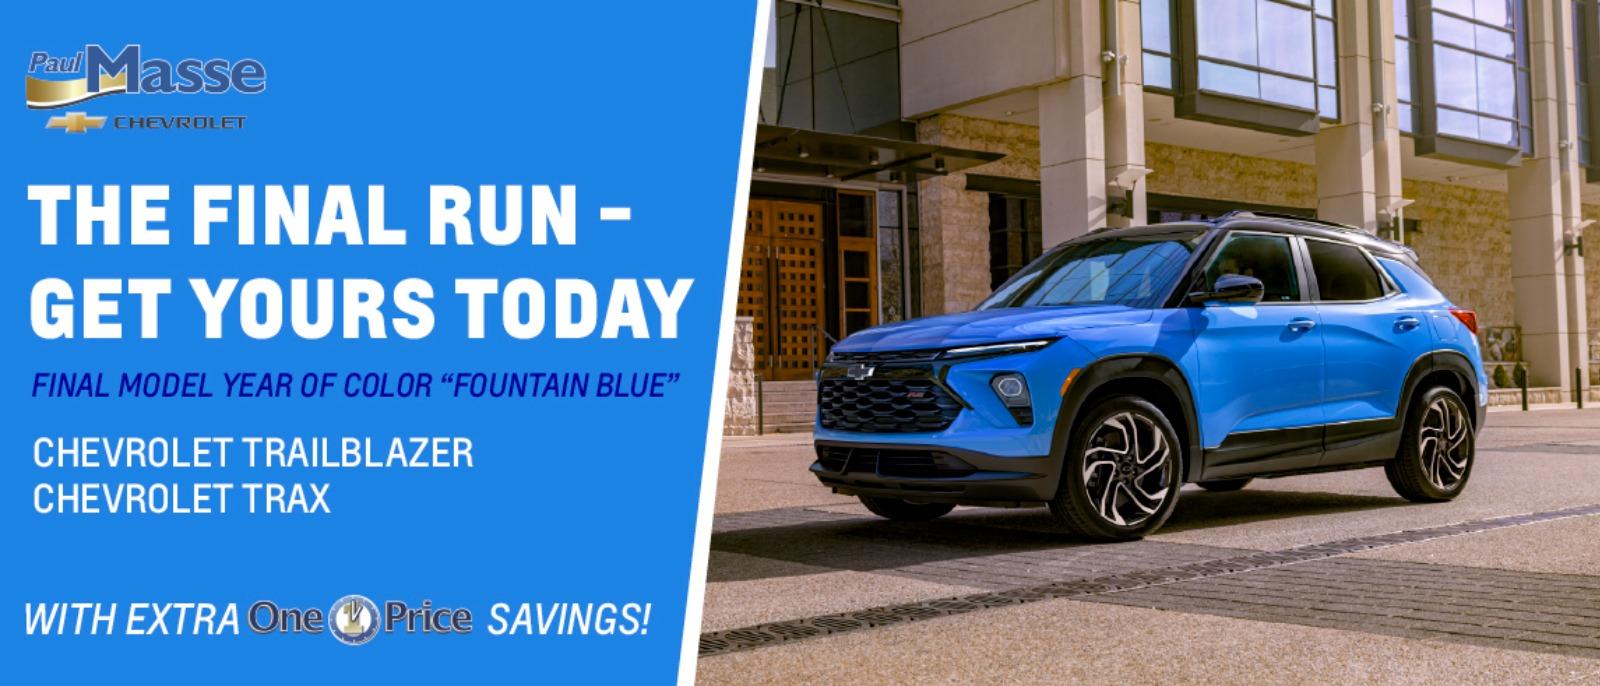 The Final Run - Get Yours Today
Final model year of color "Fountain Blue"
Chevrolet Trailblazer
Chevrolet Trax
With extra one price savings!